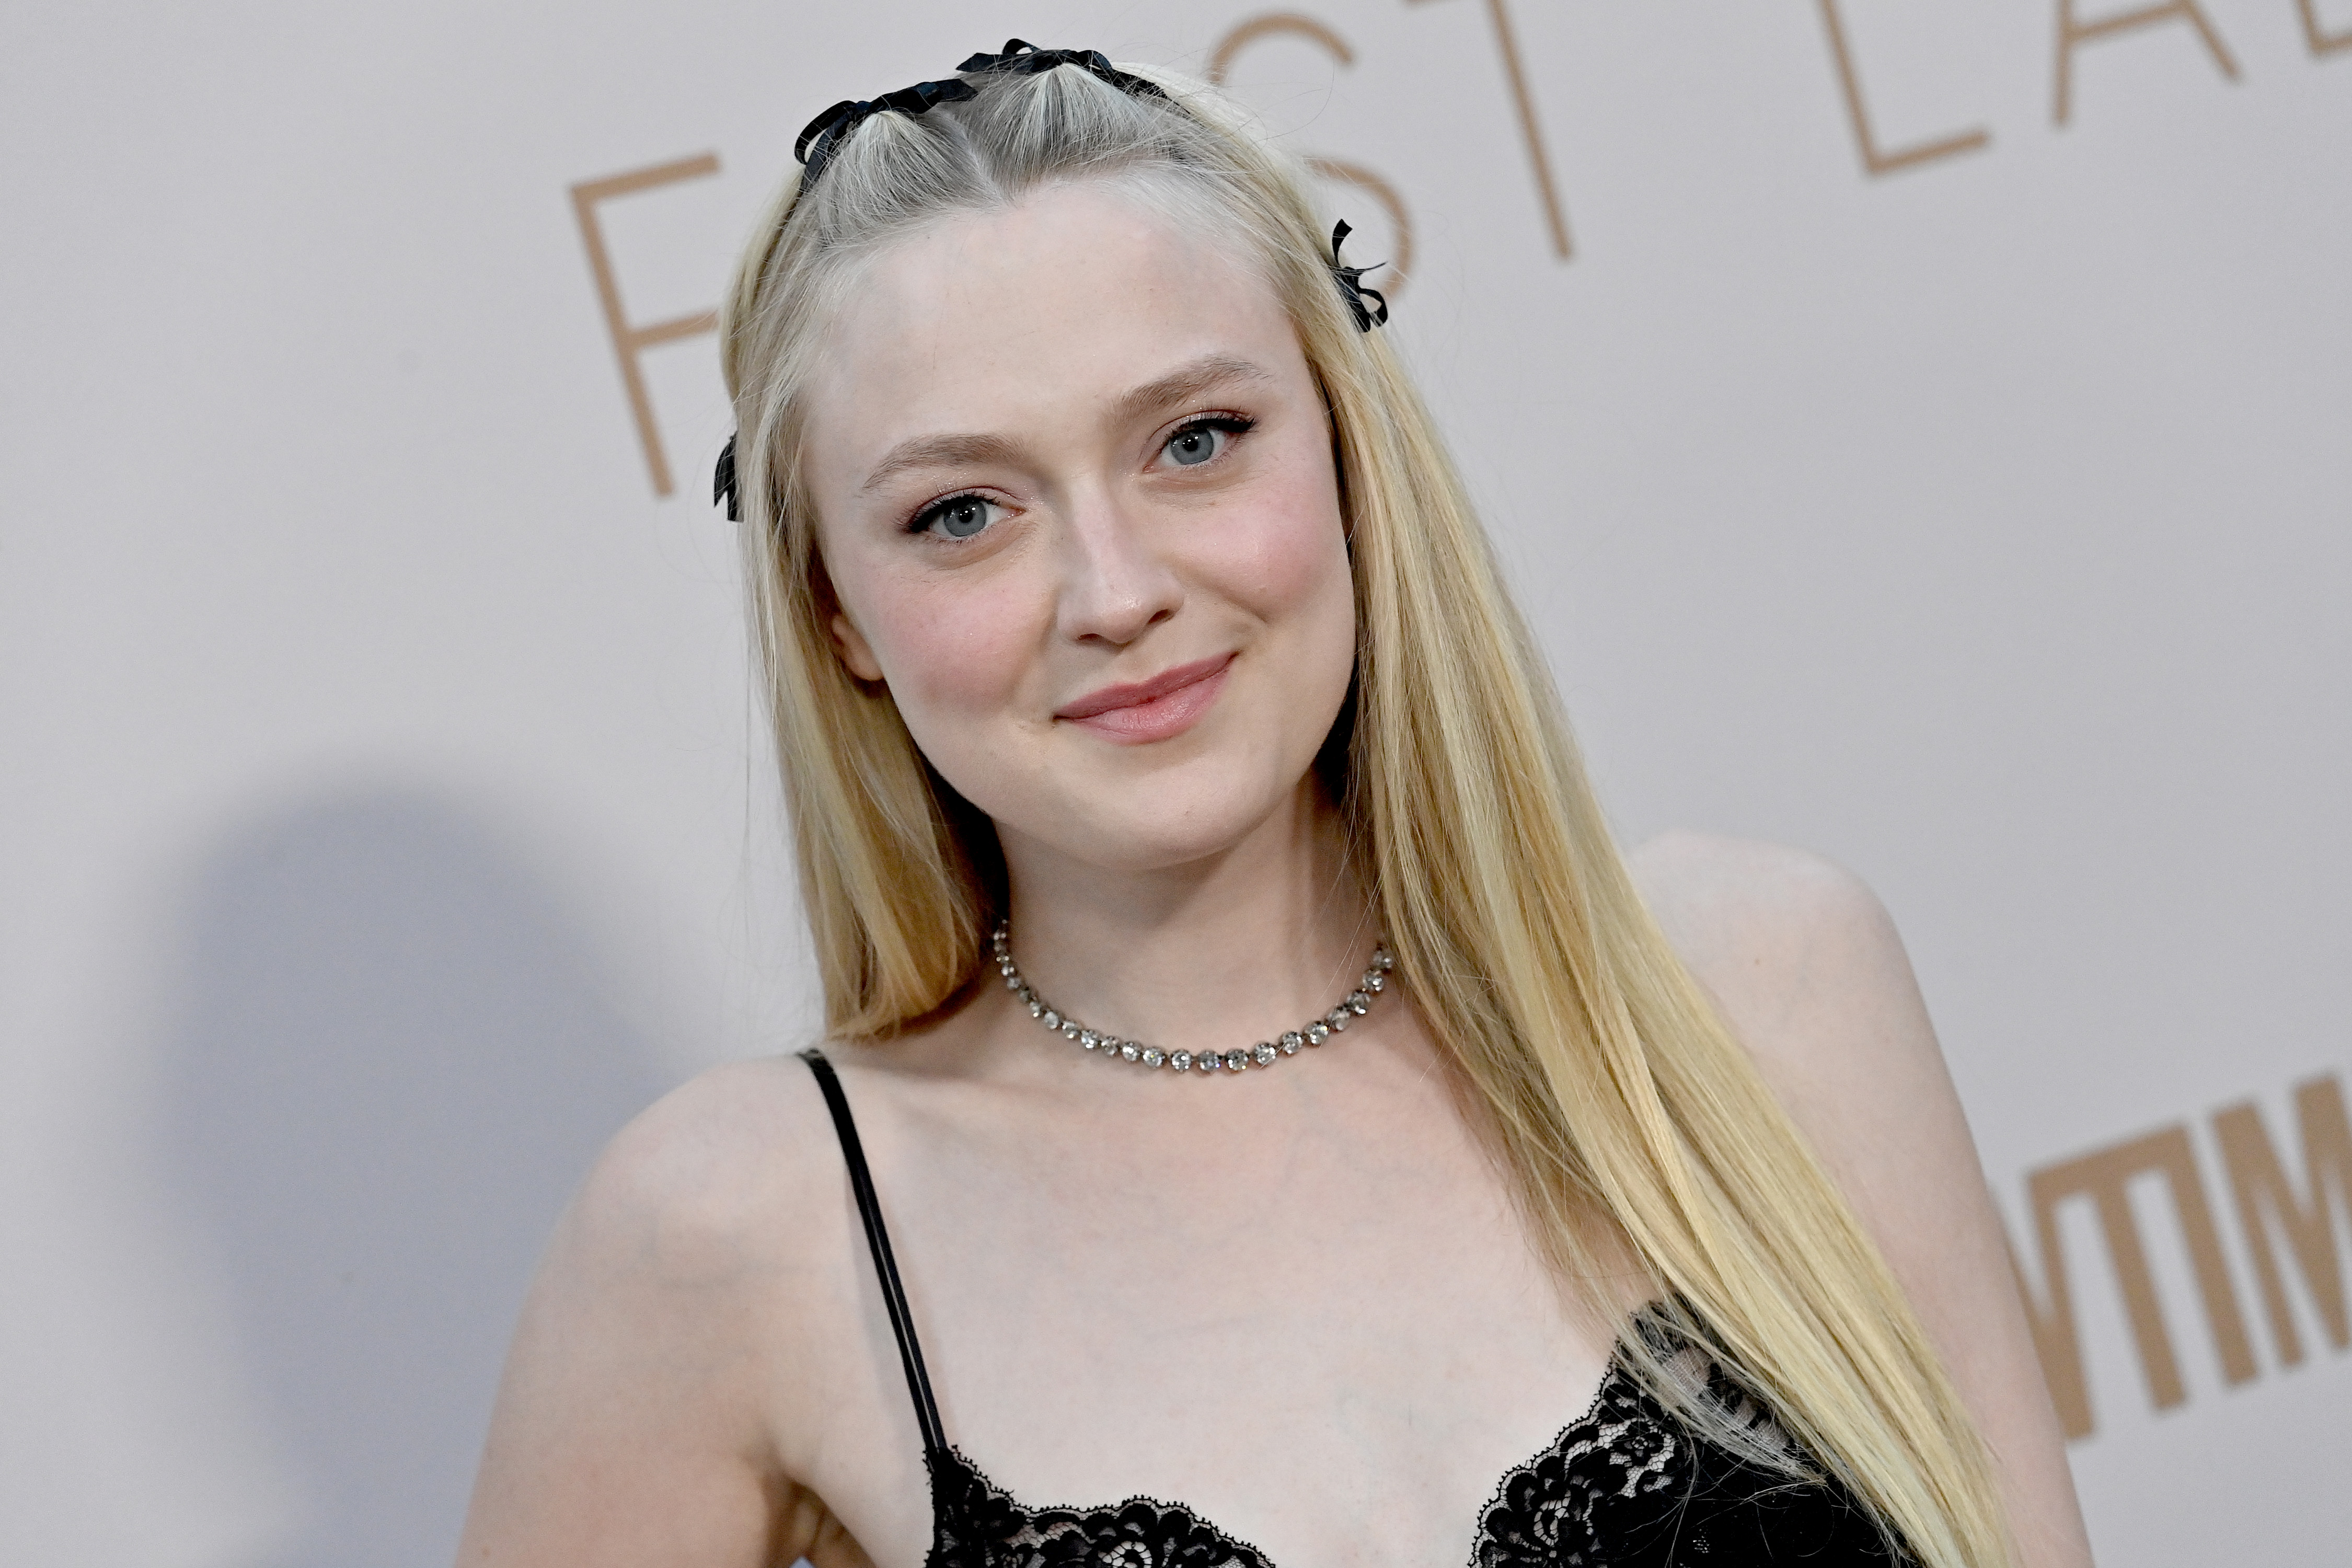 Dakota Fanning attends Showtime's FYC Event and Premiere for 